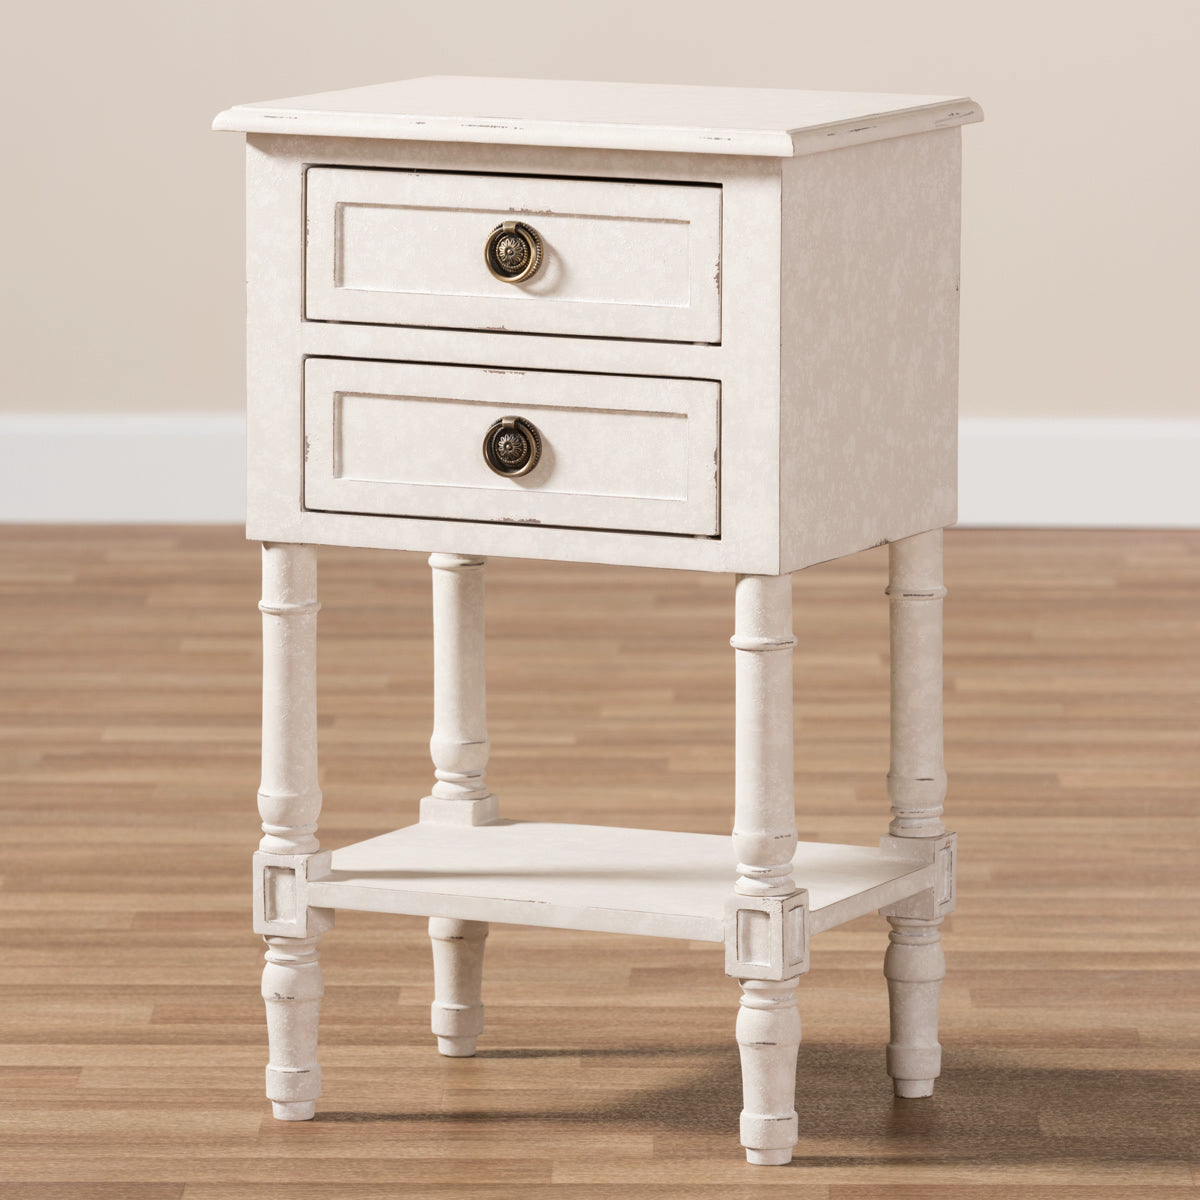 Baxton Studio Lenore Country Cottage Farmhouse Whitewashed 2-Drawer Nightstand Baxton Studio-nightstands-Minimal And Modern - 10